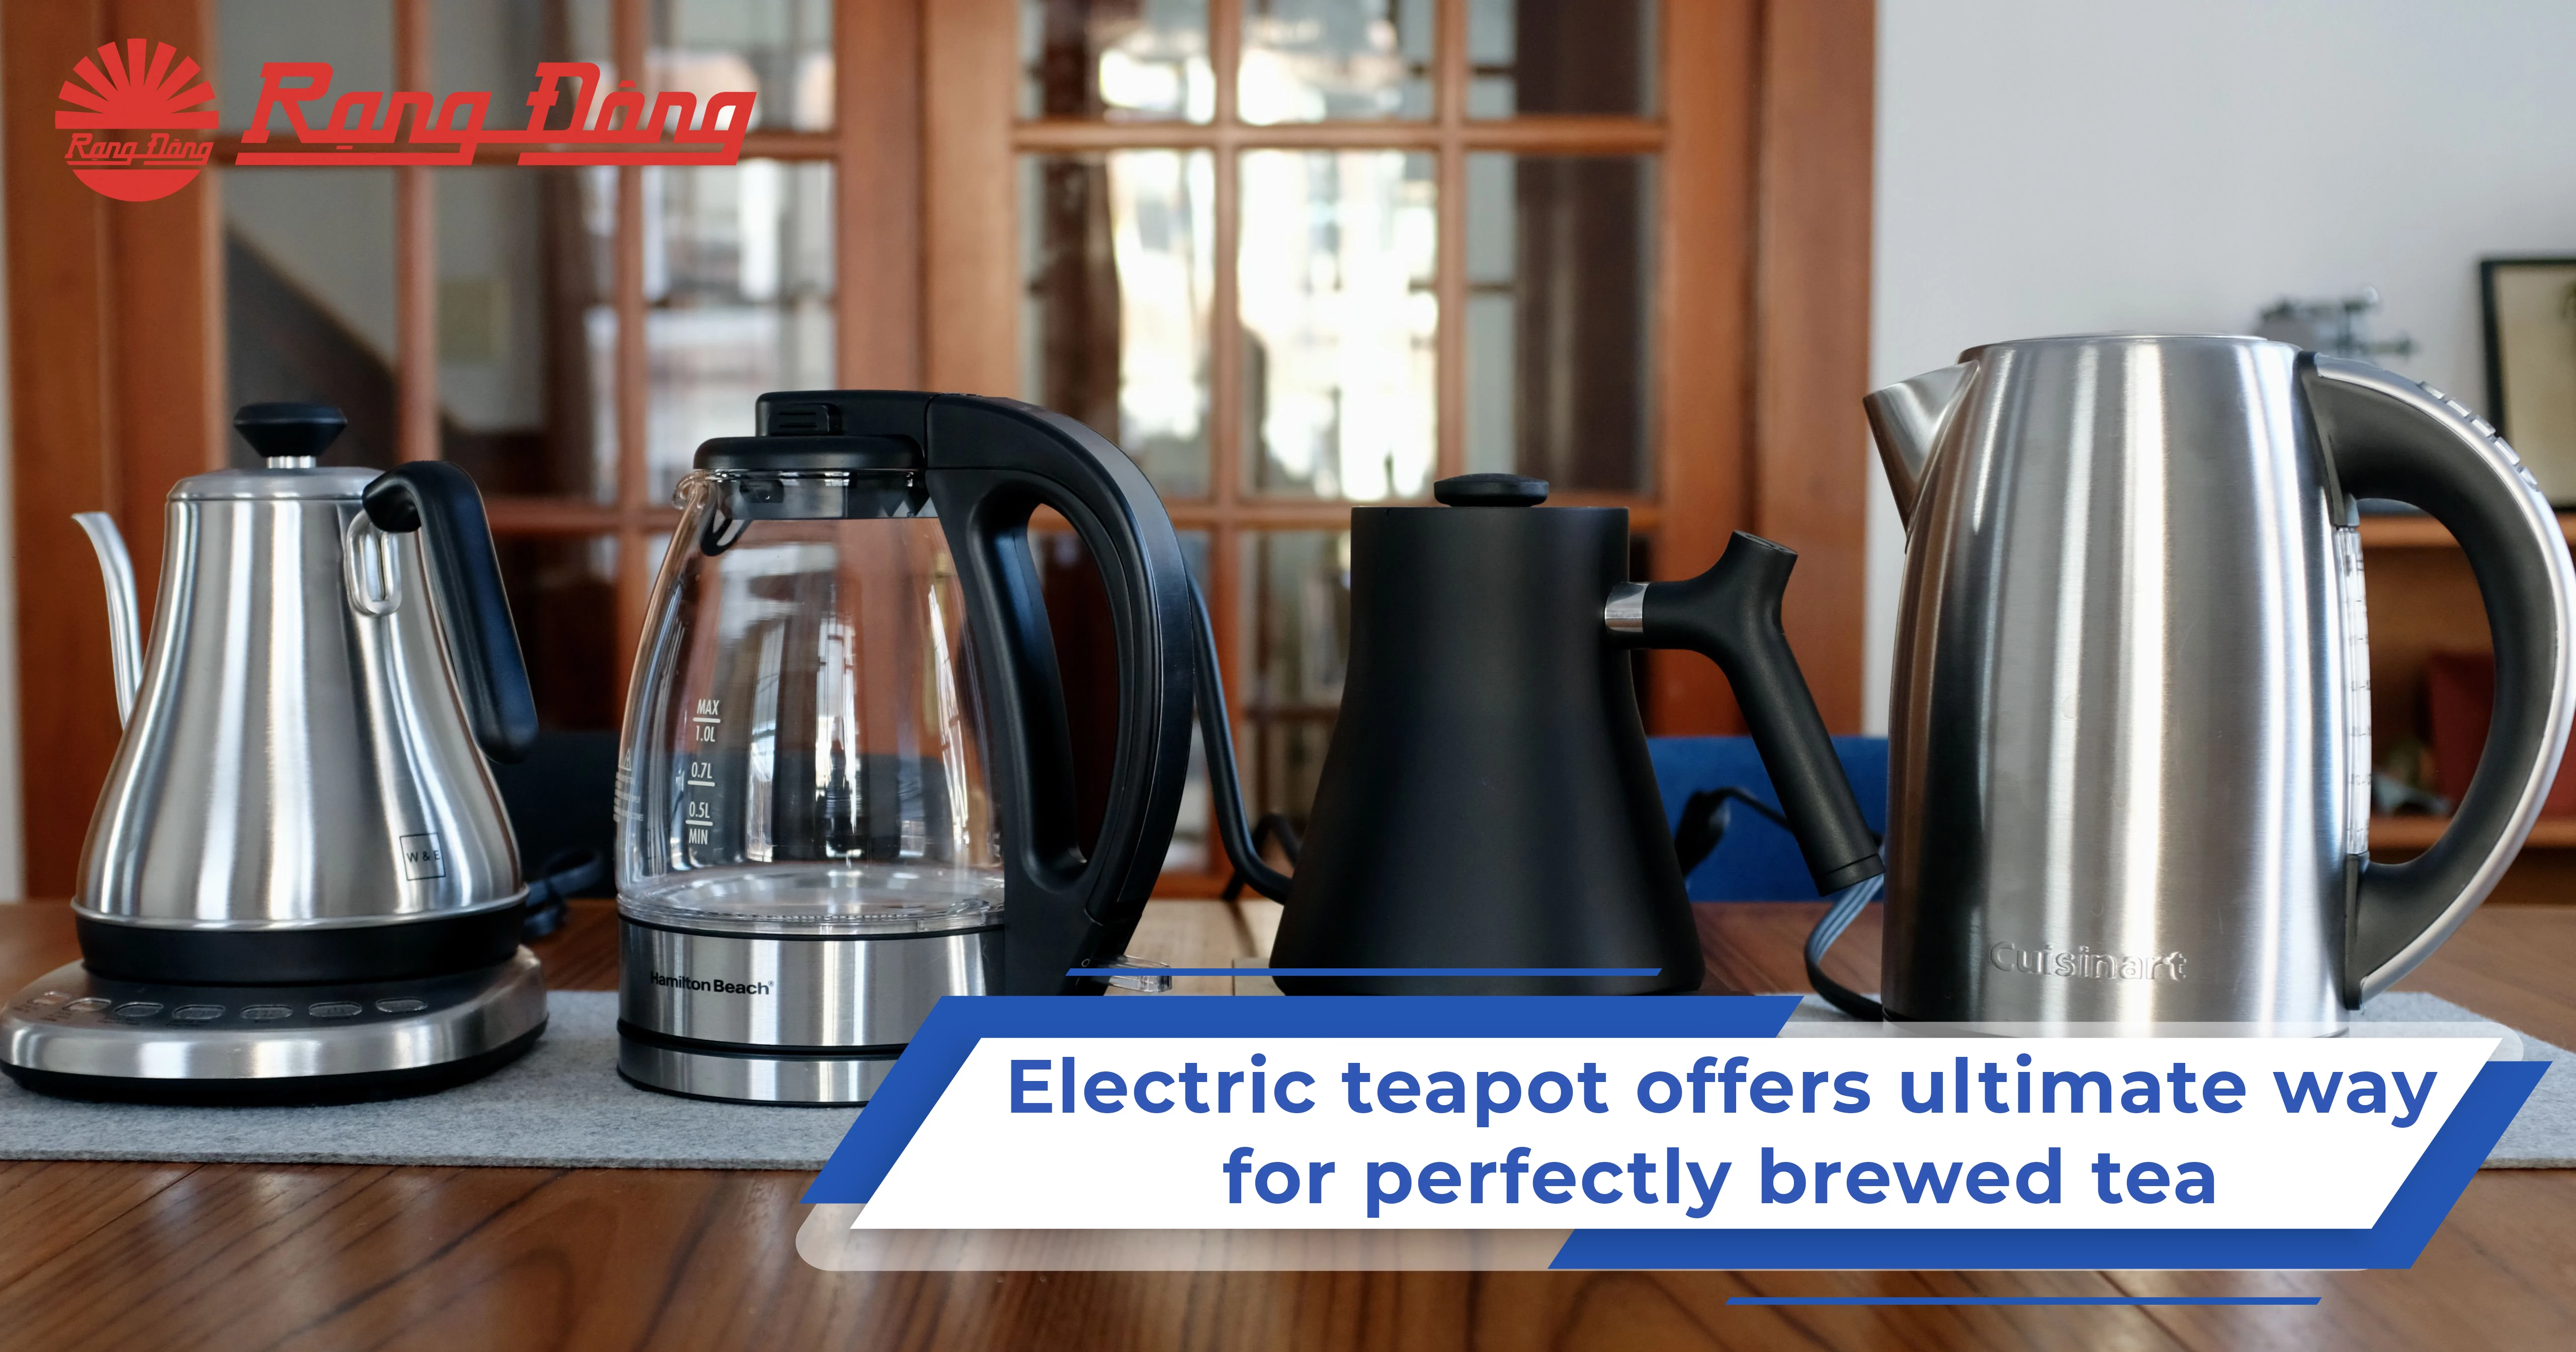 Electric teapot offers ultimate way for perfectly brewed tea